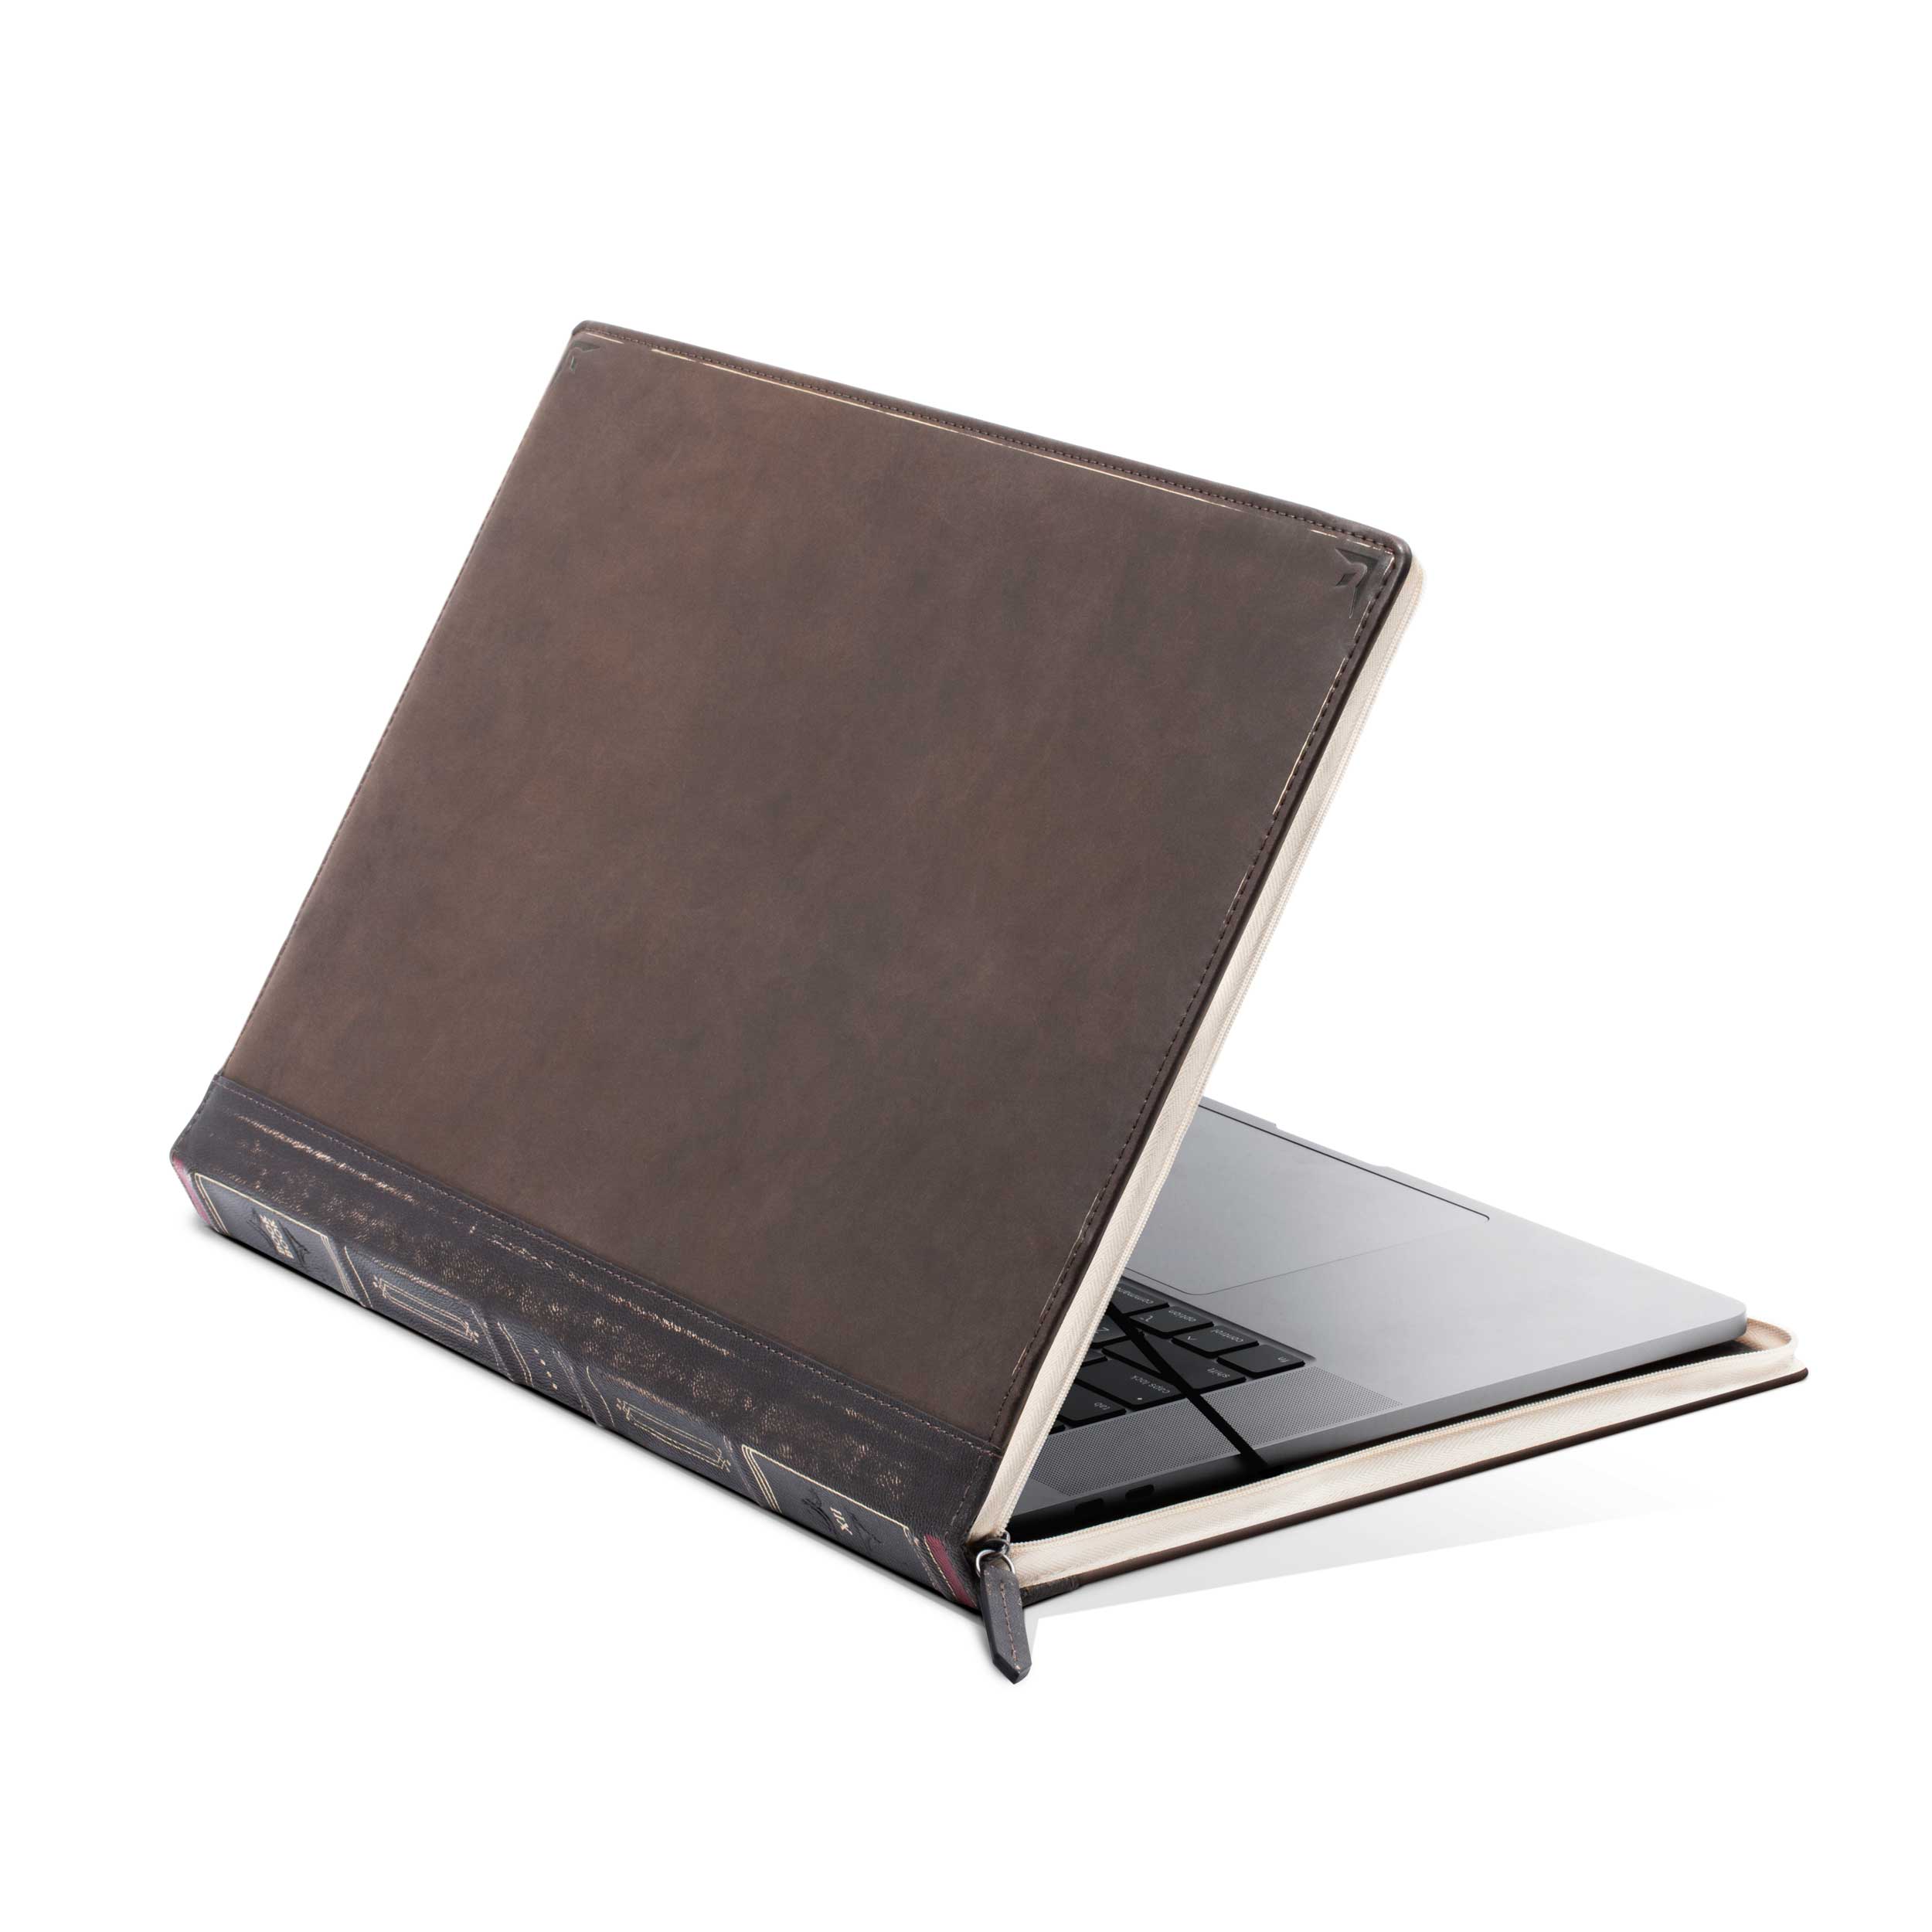 Leather Laptop Sleeve, MacBook Pro 13 inch Air Protective Cover